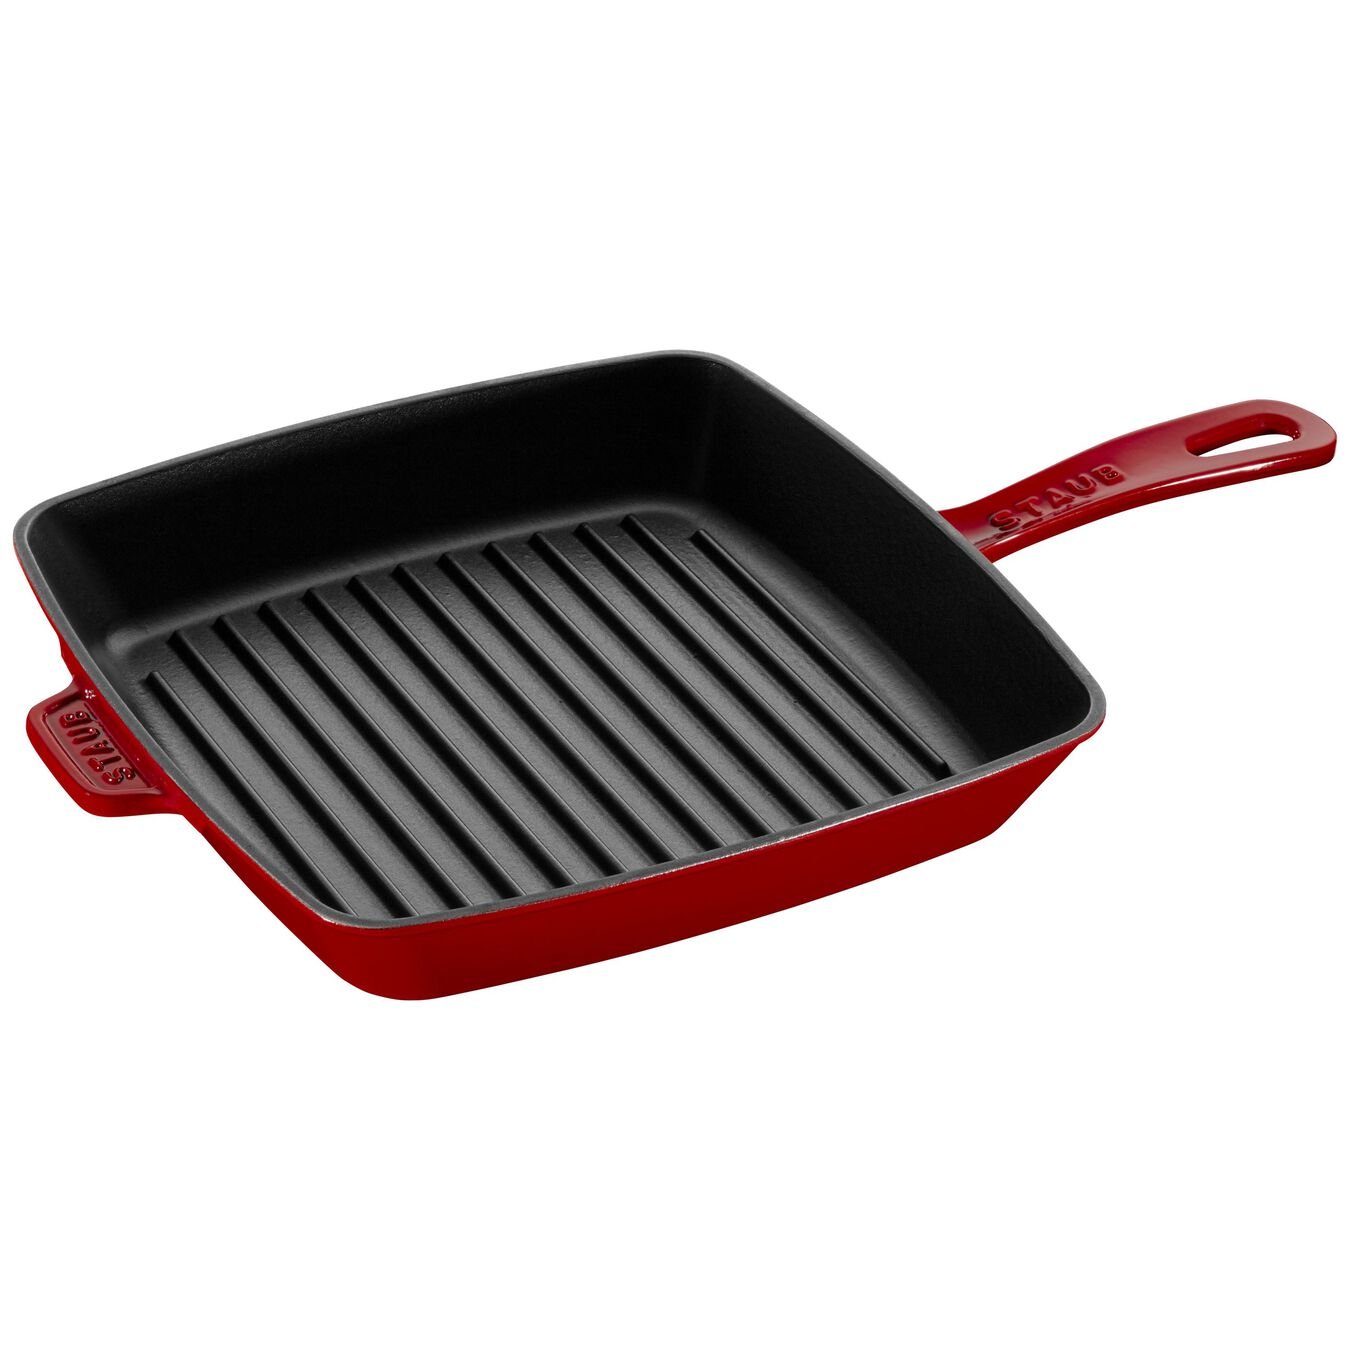 26 cm square Cast iron American grill cherry,,large 1